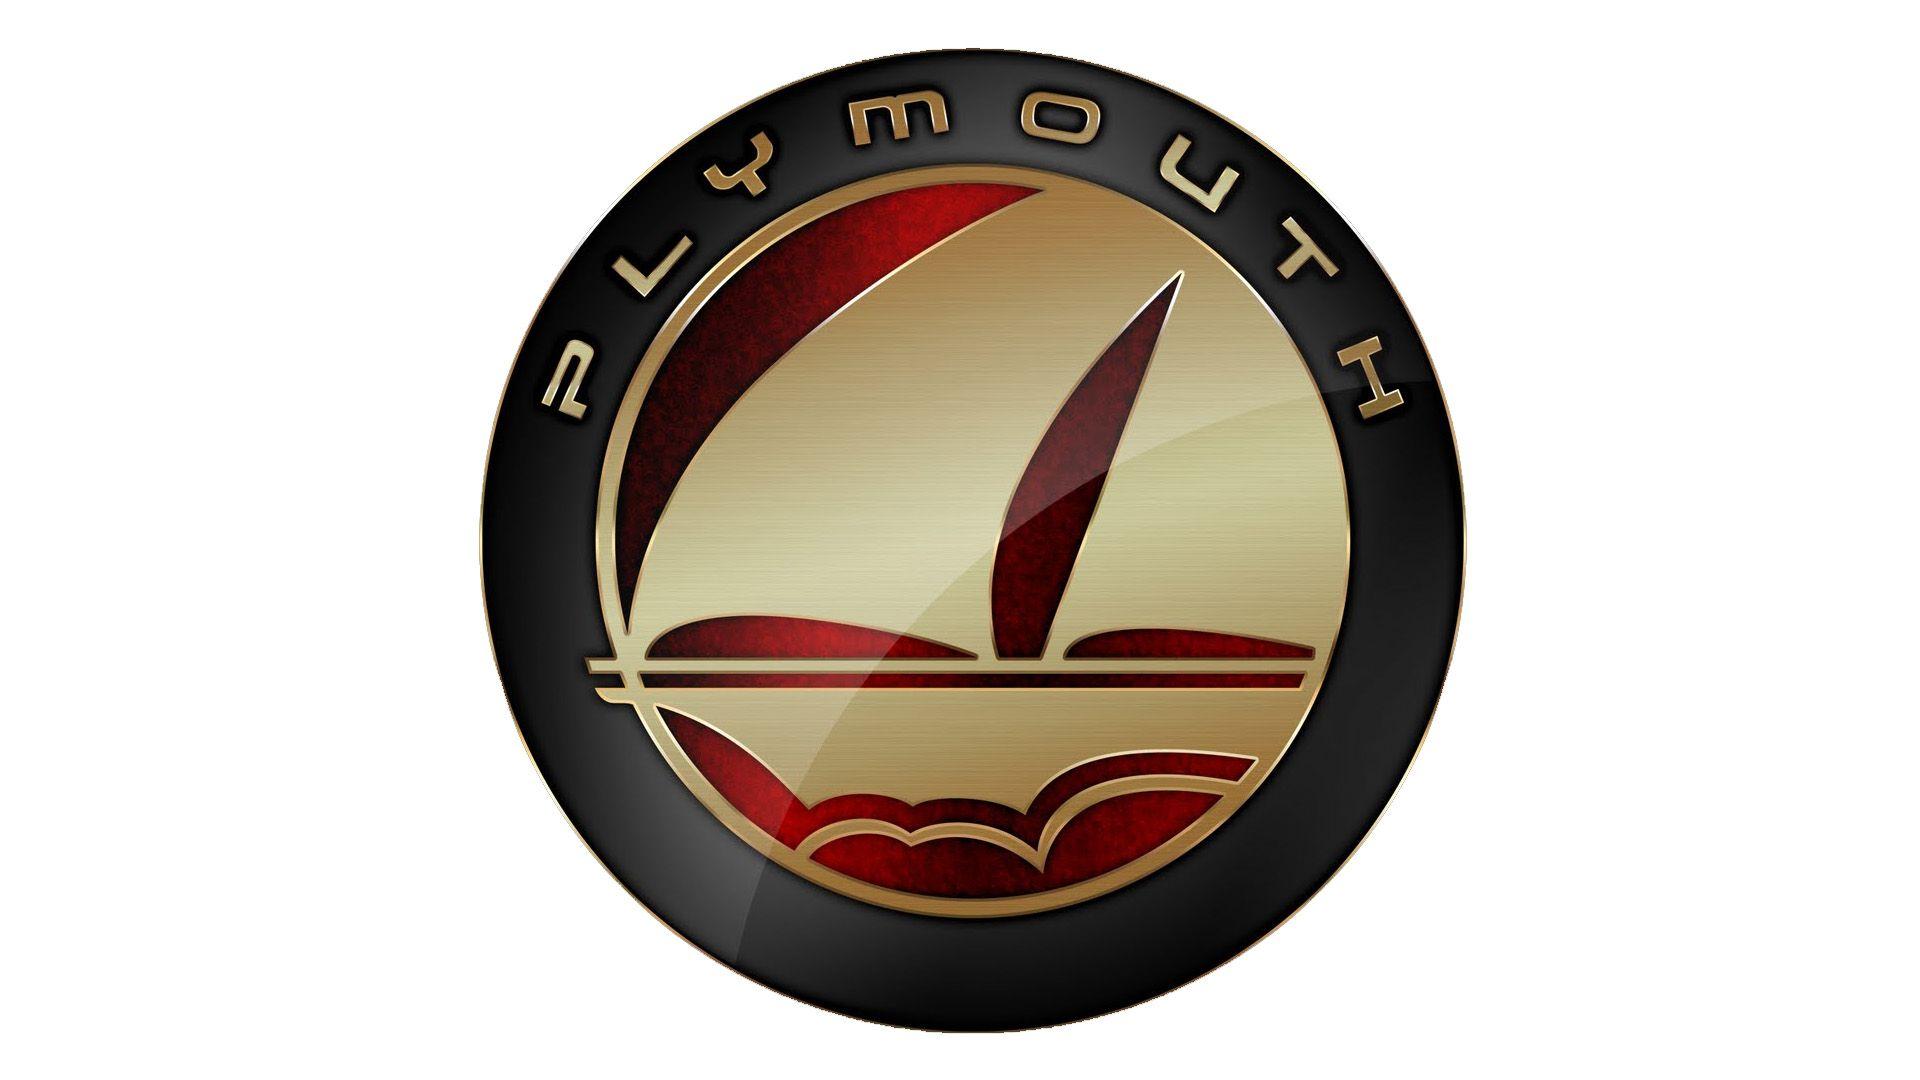 Plymouth Car Logo - Plymouth Logo Meaning and History, latest models | World Cars Brands